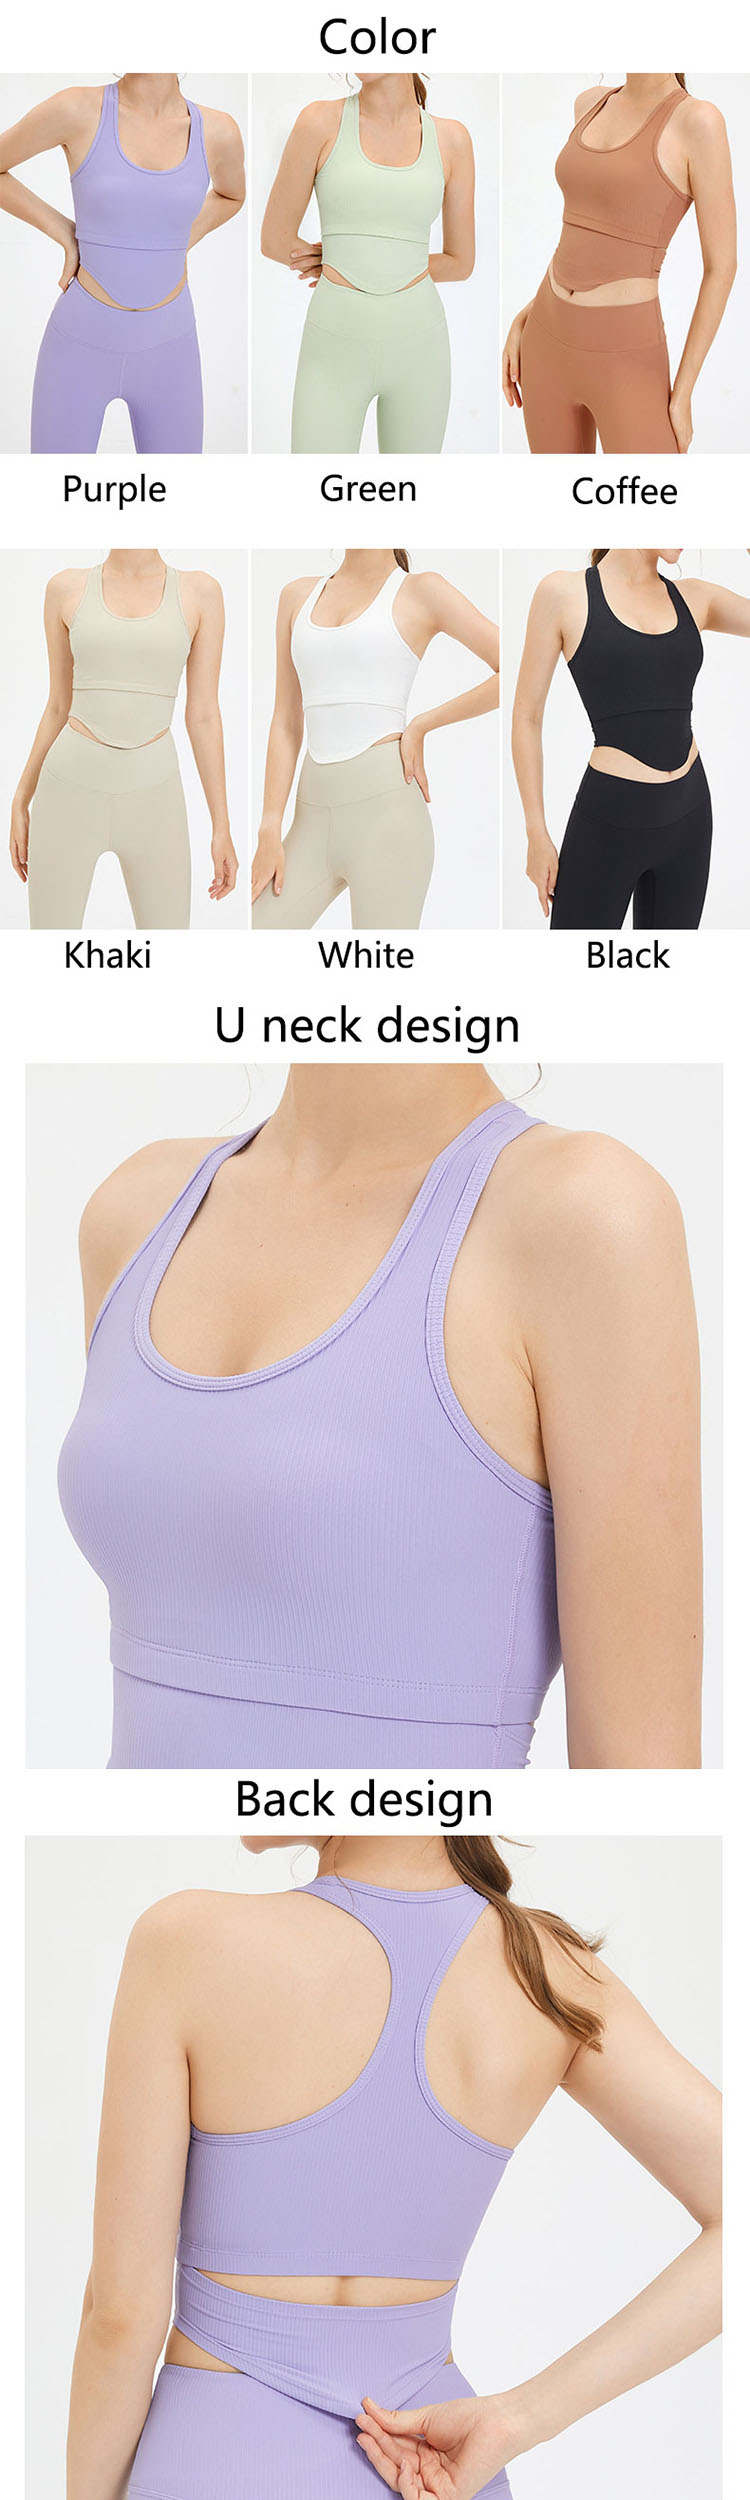 Hem design plays an important role in best yoga shirts